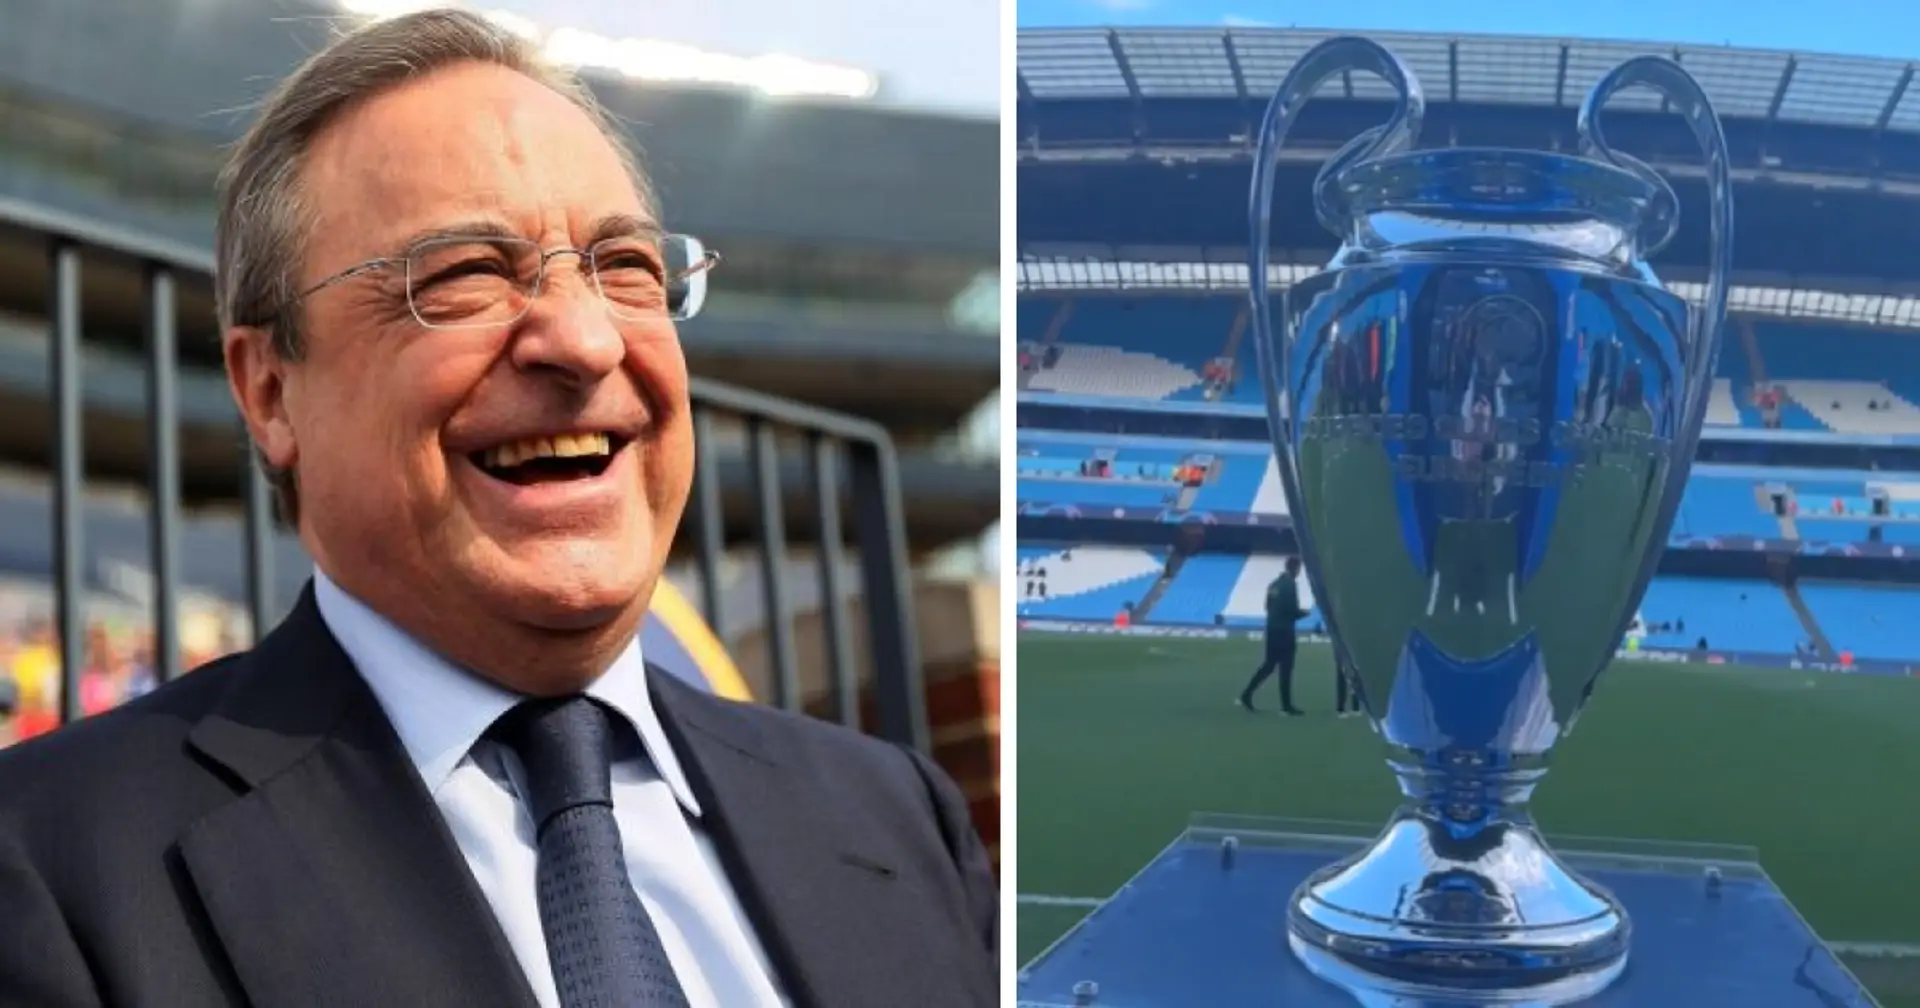 'Like flexing your first million dollars to Warren Buffet': Football fans react to Man City flexing trophy to Real Madrid